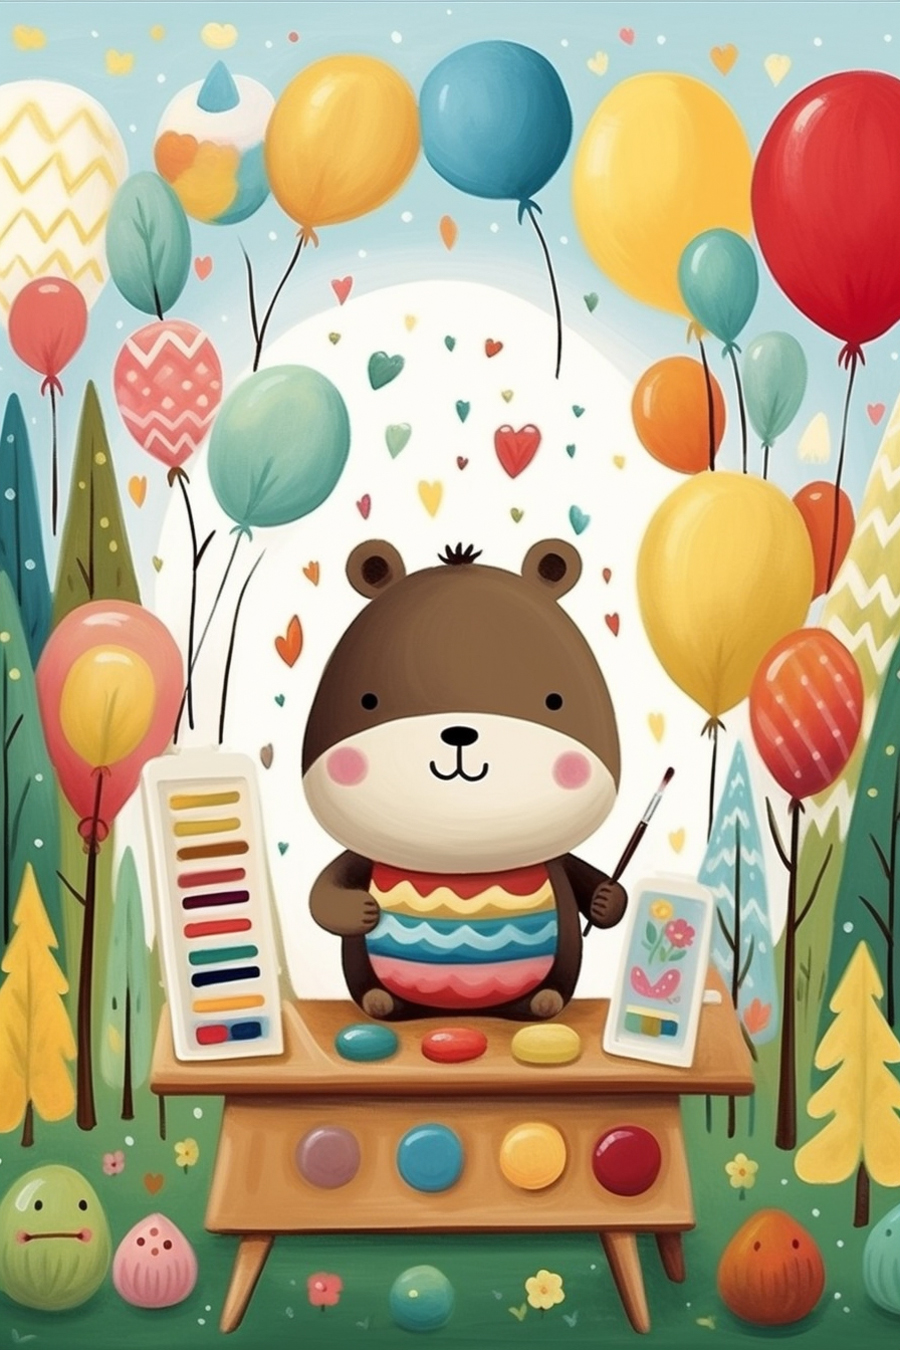 A cartoon bear painting with paints and balloons in the forest.